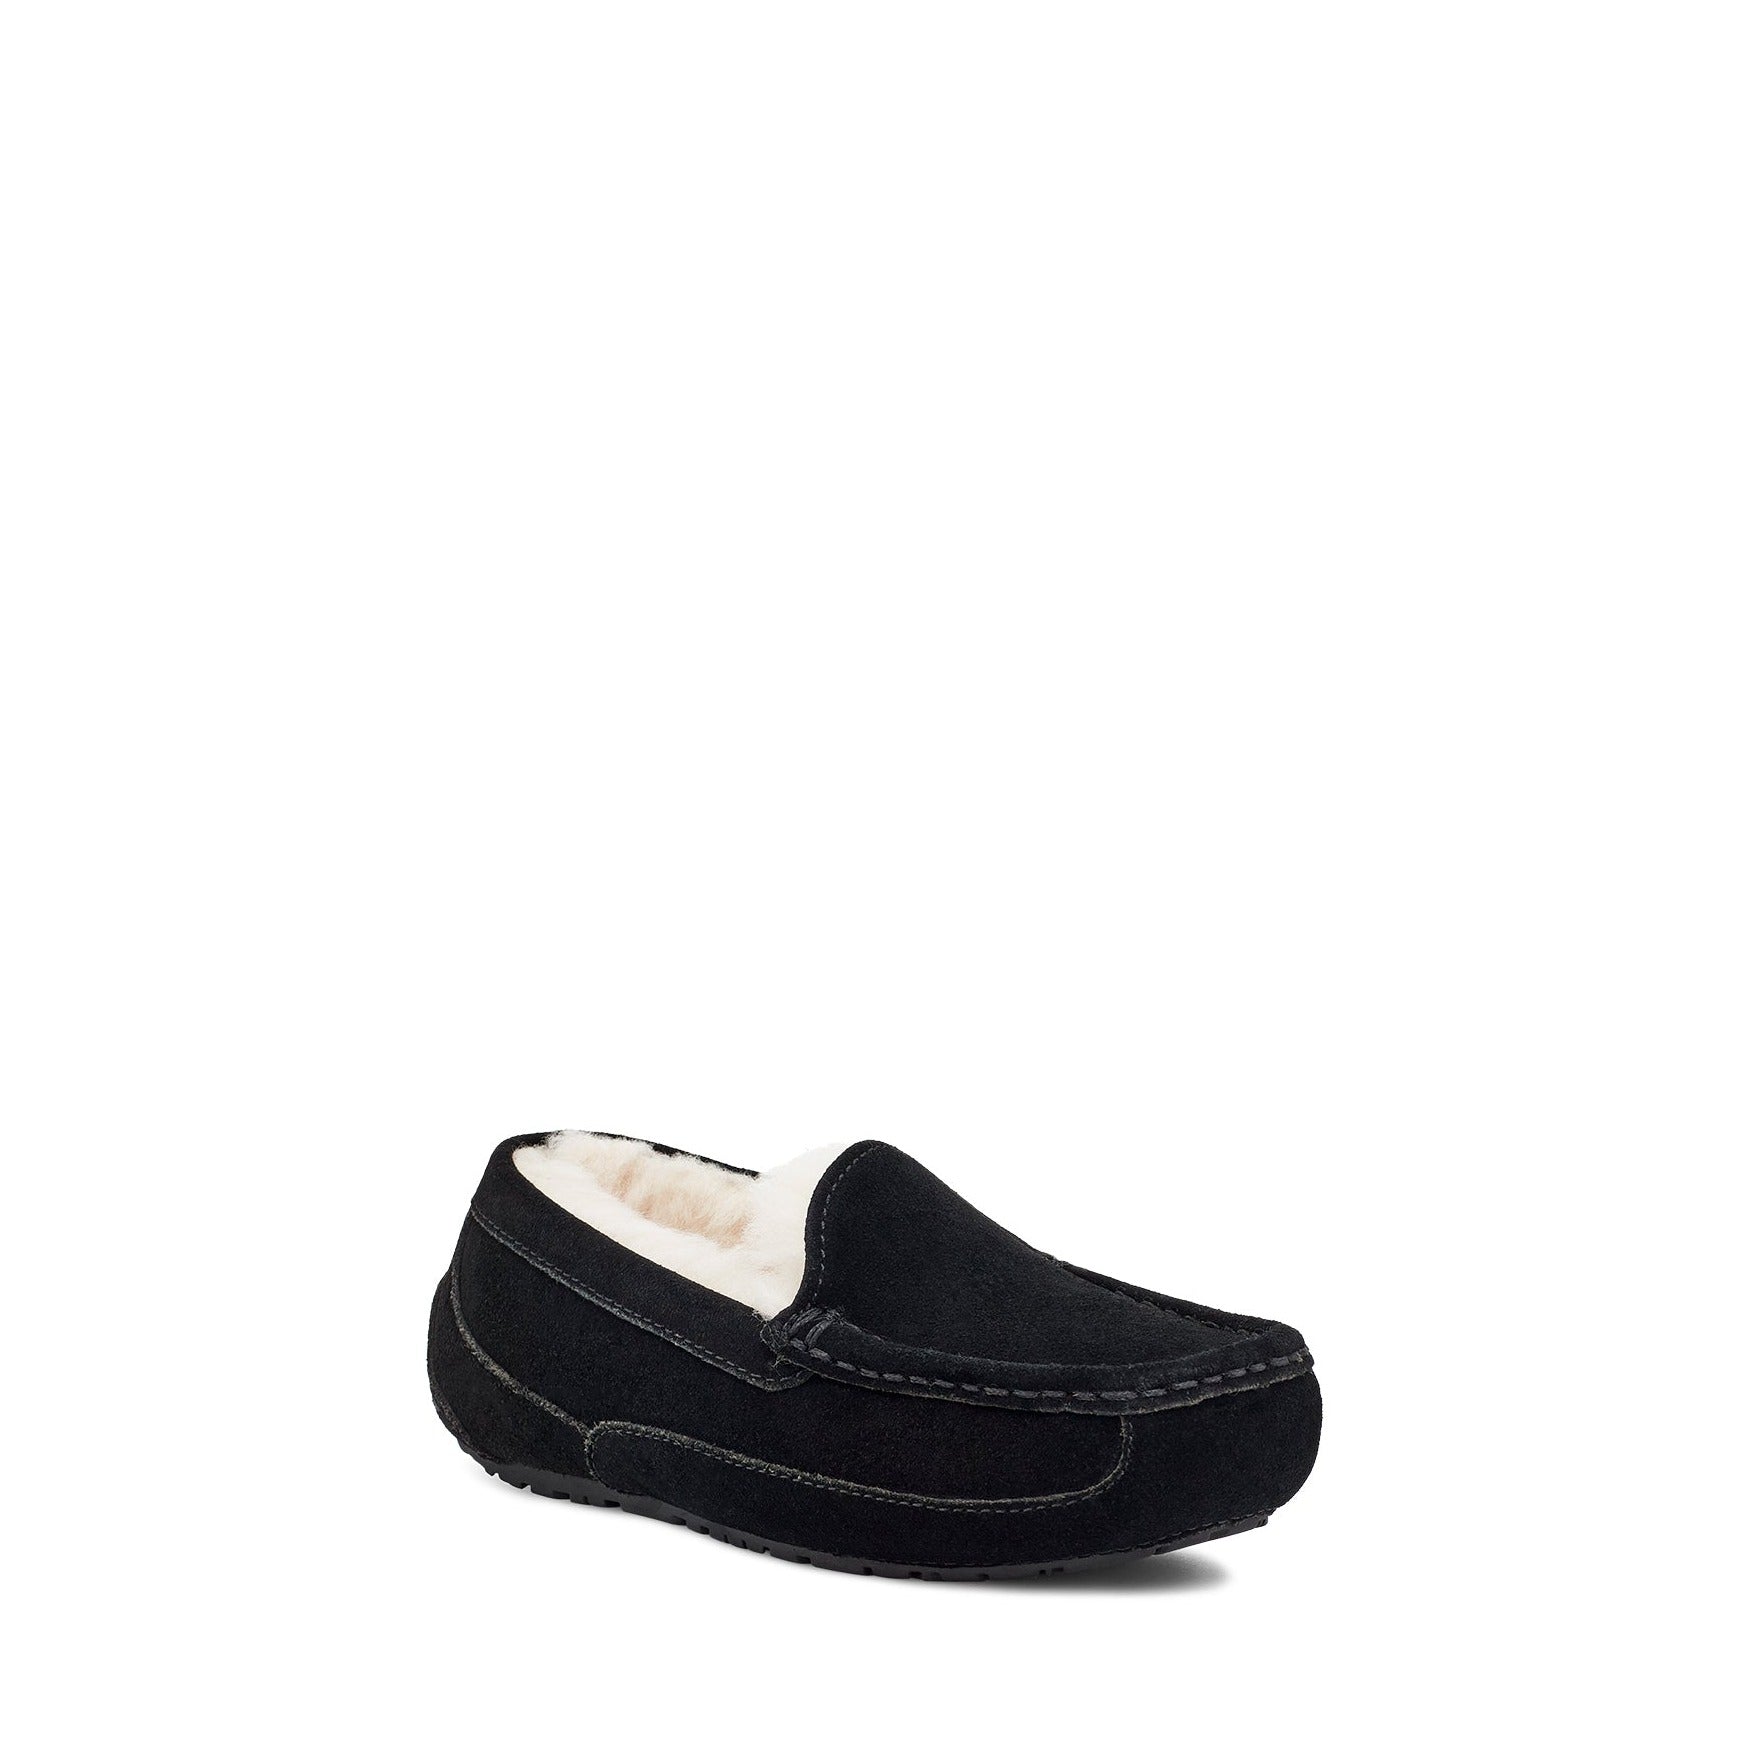 Sample UGG Kids Ascot Suede Loafers & Laceups   